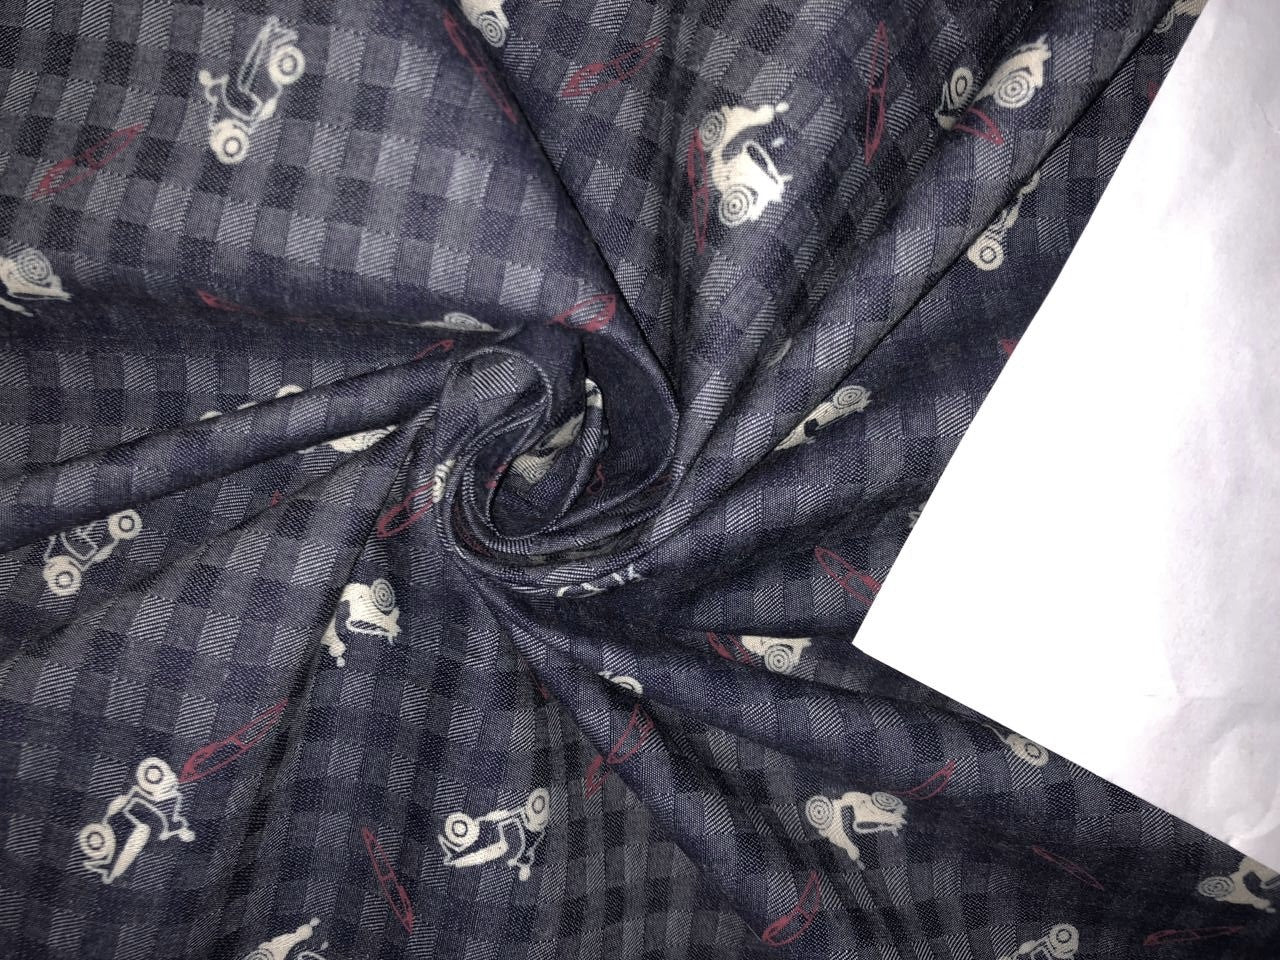 100% Cotton Denim Fabric 58" wide available in 2 STYLES DENIM PLAIDS WITH SCOOTER MOTIF AND  DENIM SELF PLAIDS CHARCOAL GREY